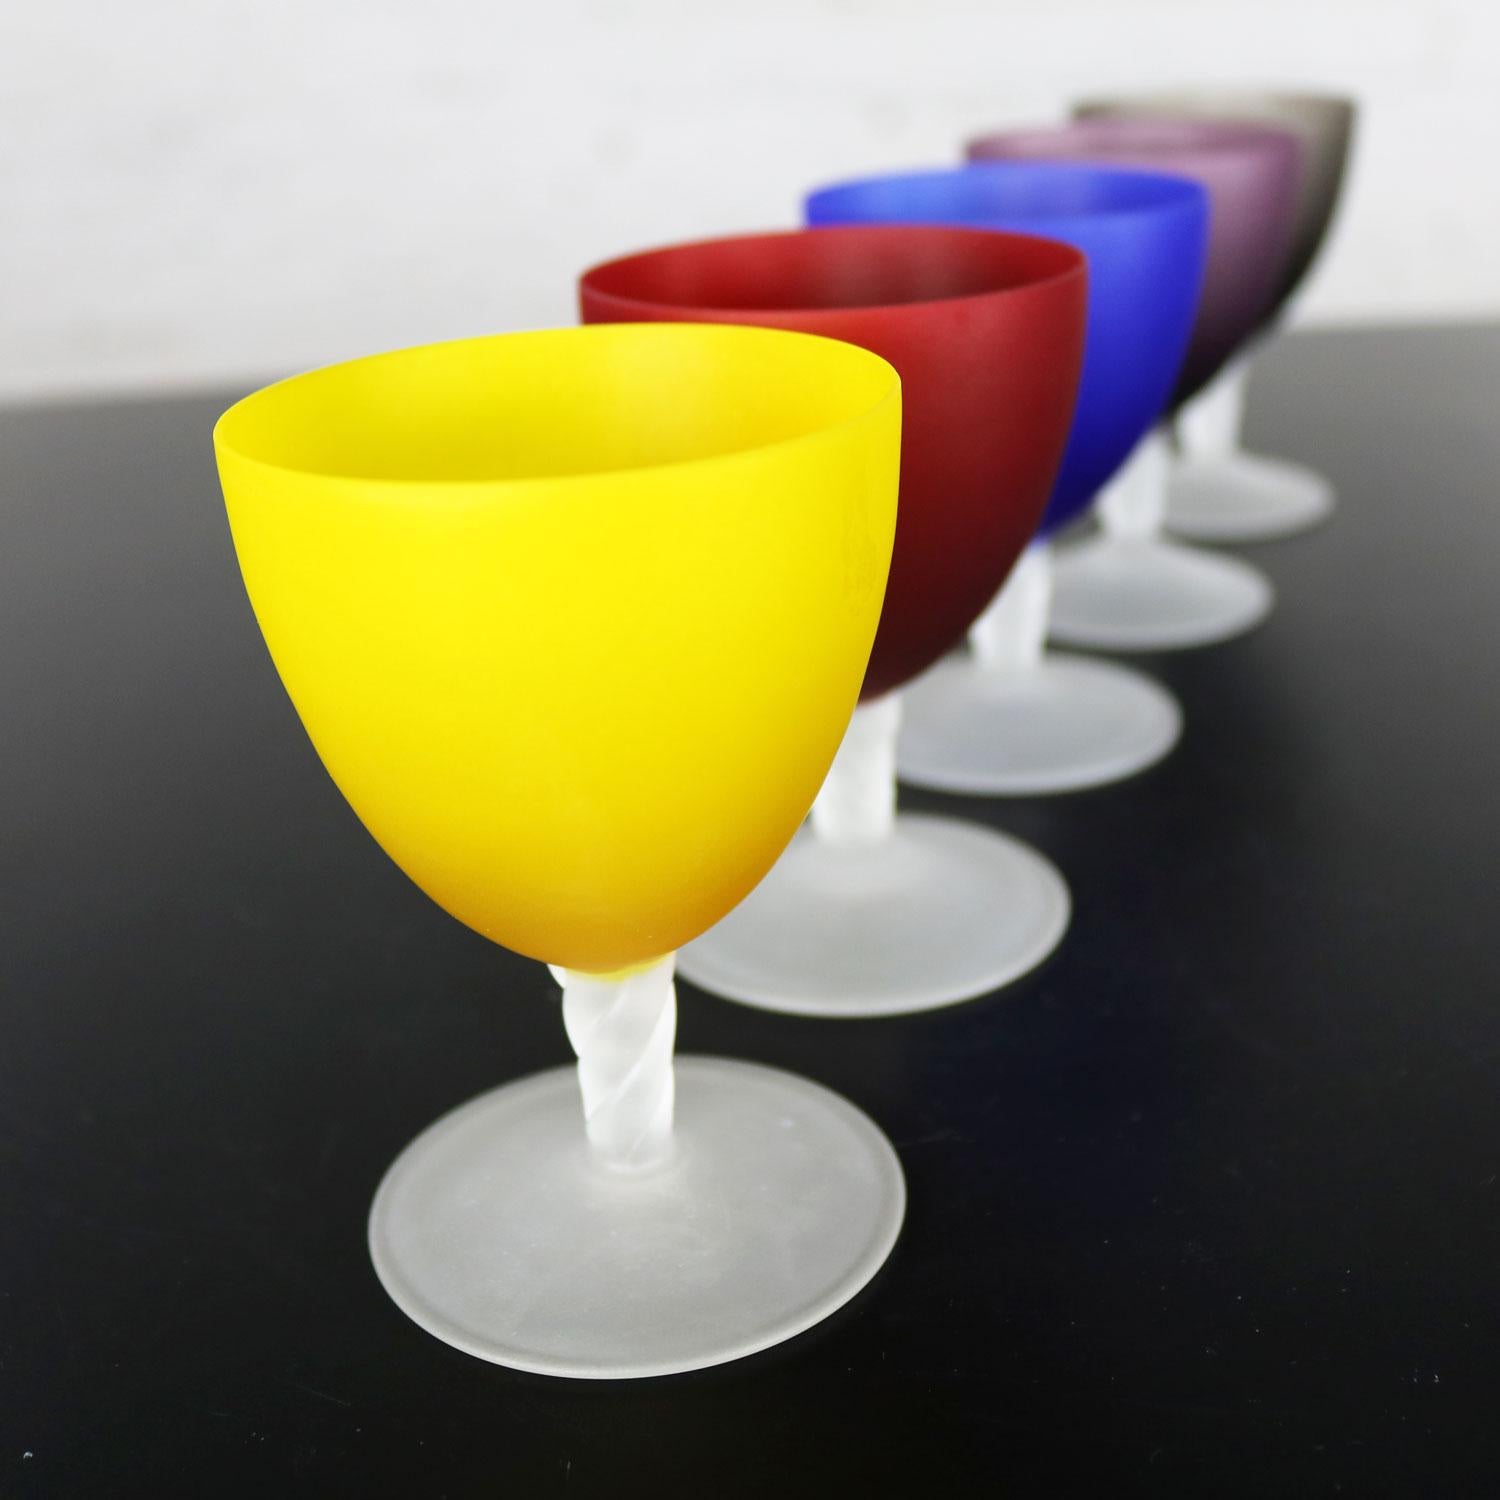 Set of 5 Small Multicolored Frosted Glass Wine Coupes or Cordial Glasses 8